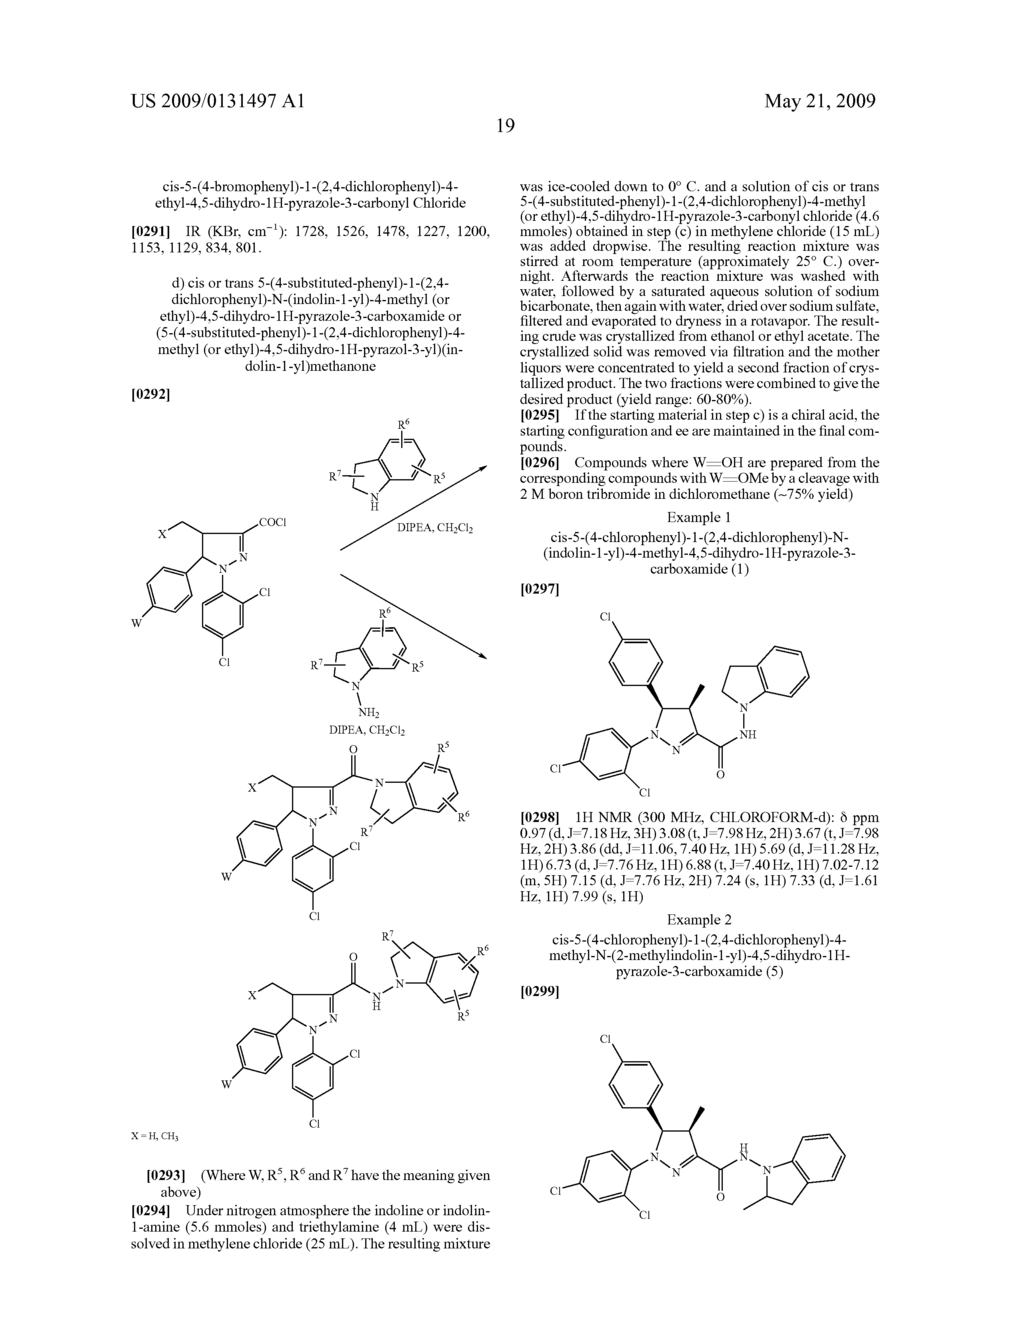 INDOLINE-SUBSTITUTED PYRAZOLINE DERIVATIVES, THEIR PREPARATION AND USE AS MEDICAMENTS - diagram, schematic, and image 20